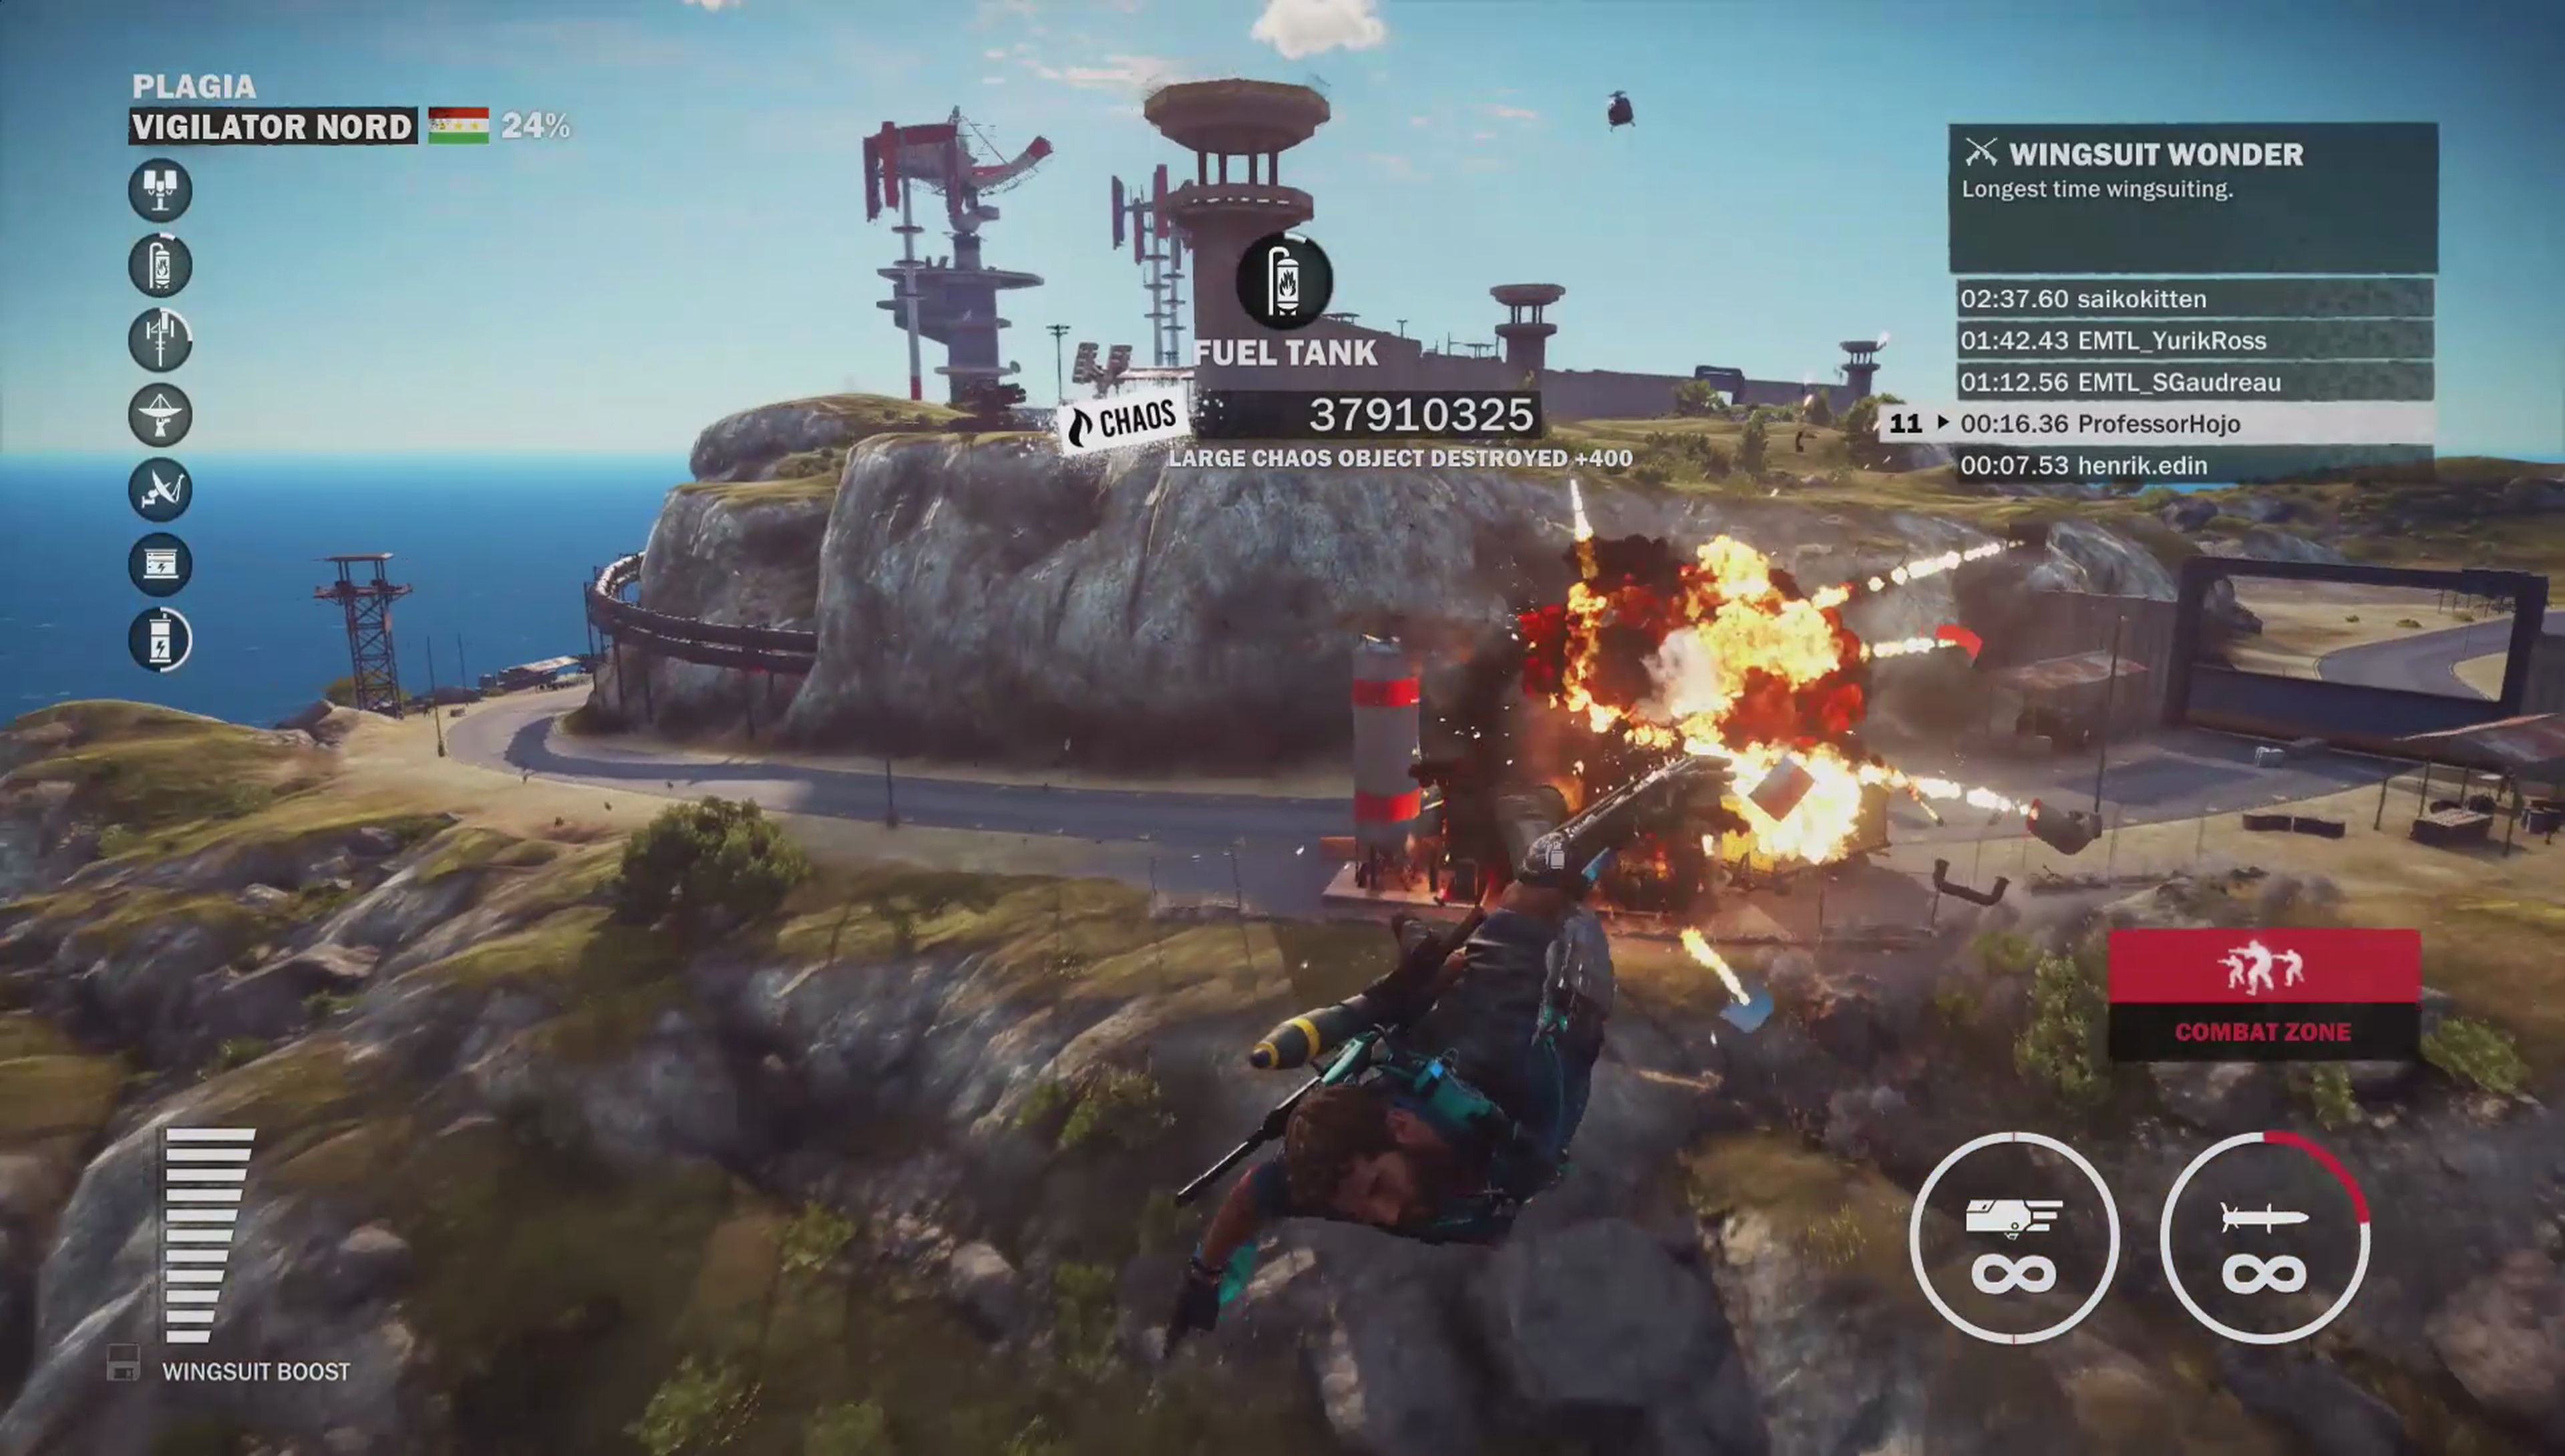 Just Cause 3 - Avance del DLC Sky Fortress